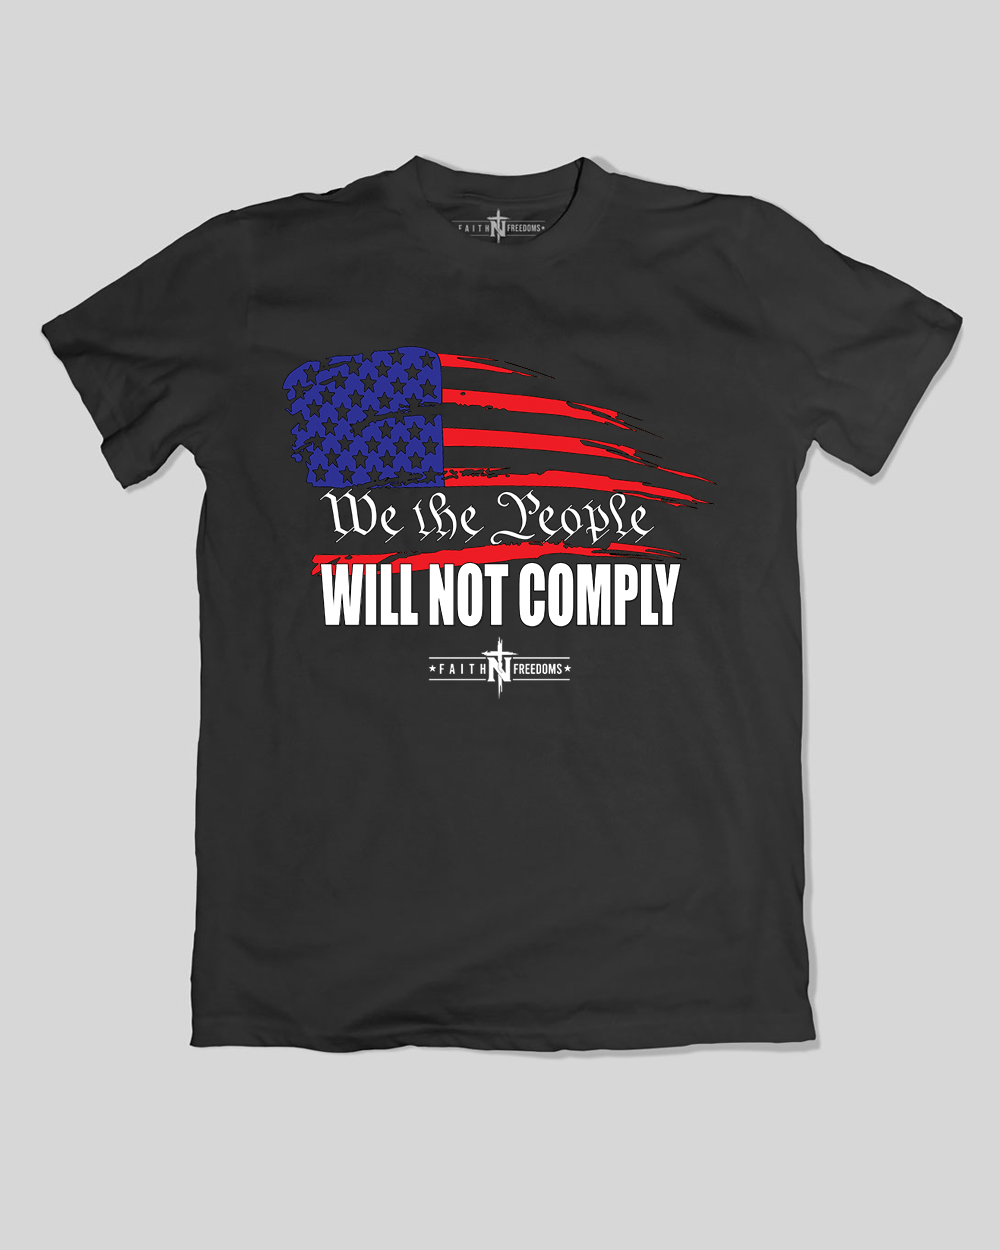 We The People, Will NOT Comply T-Shirt